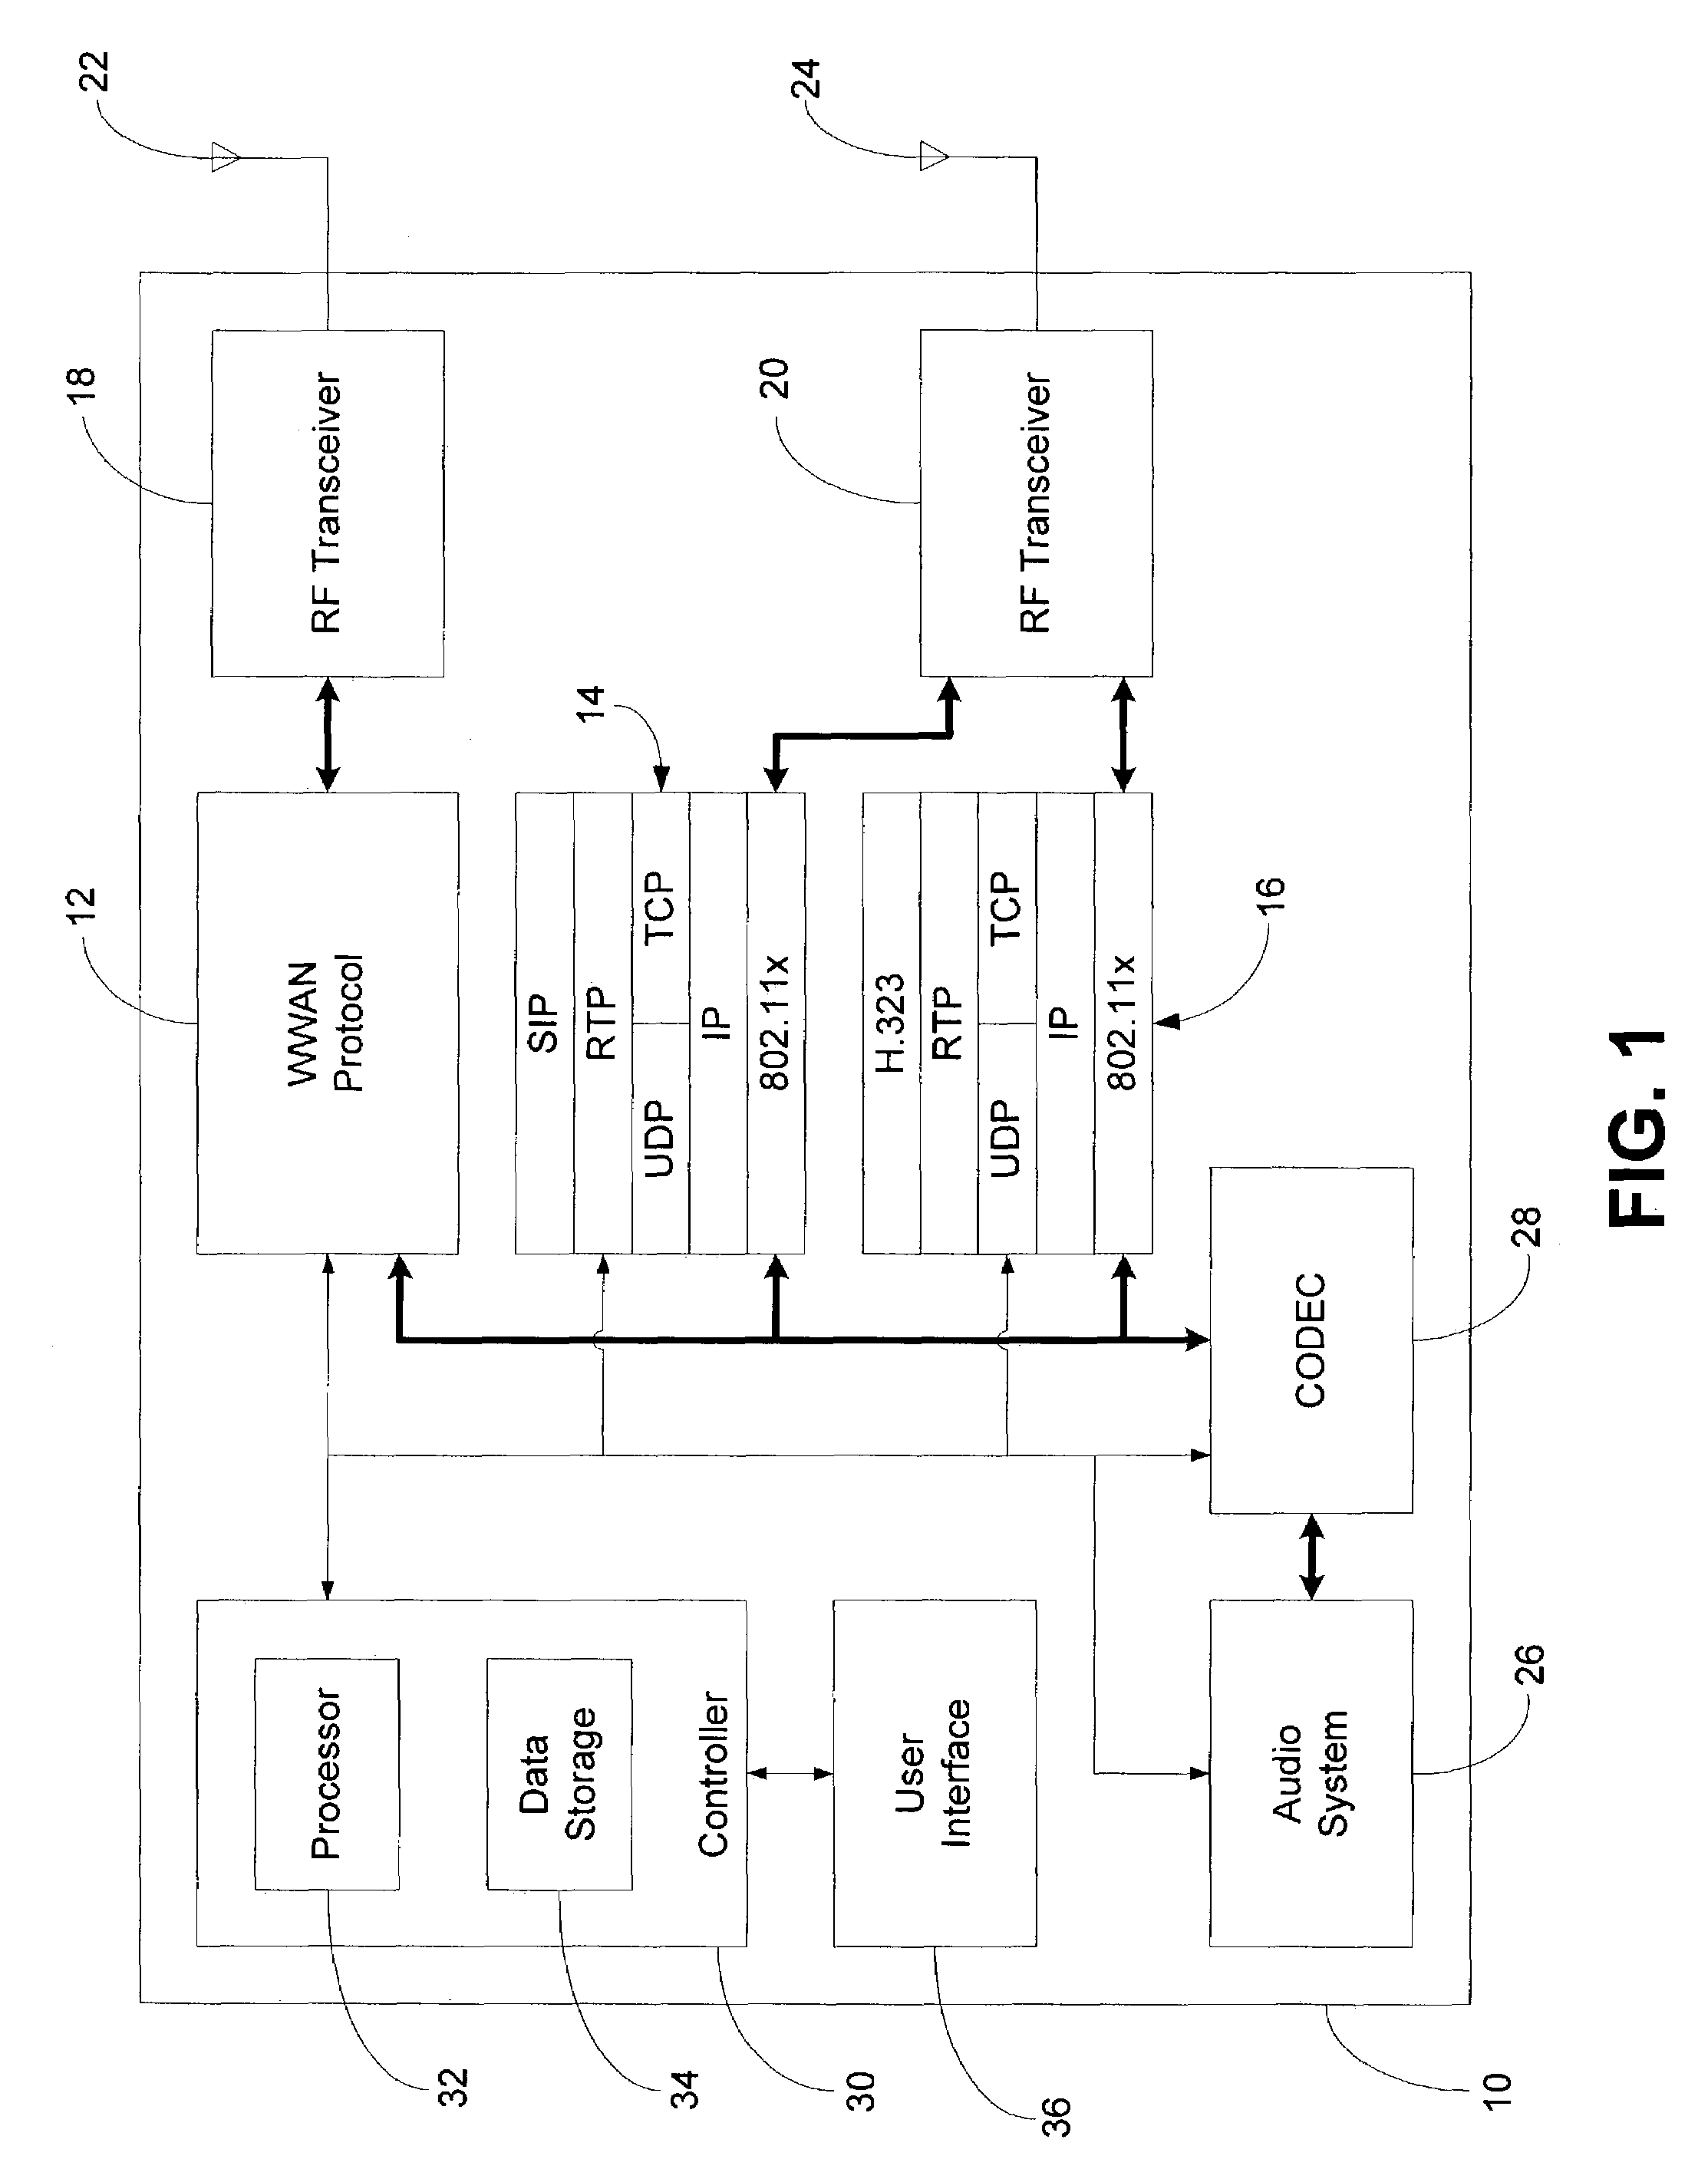 Multi-mode mobile station and method